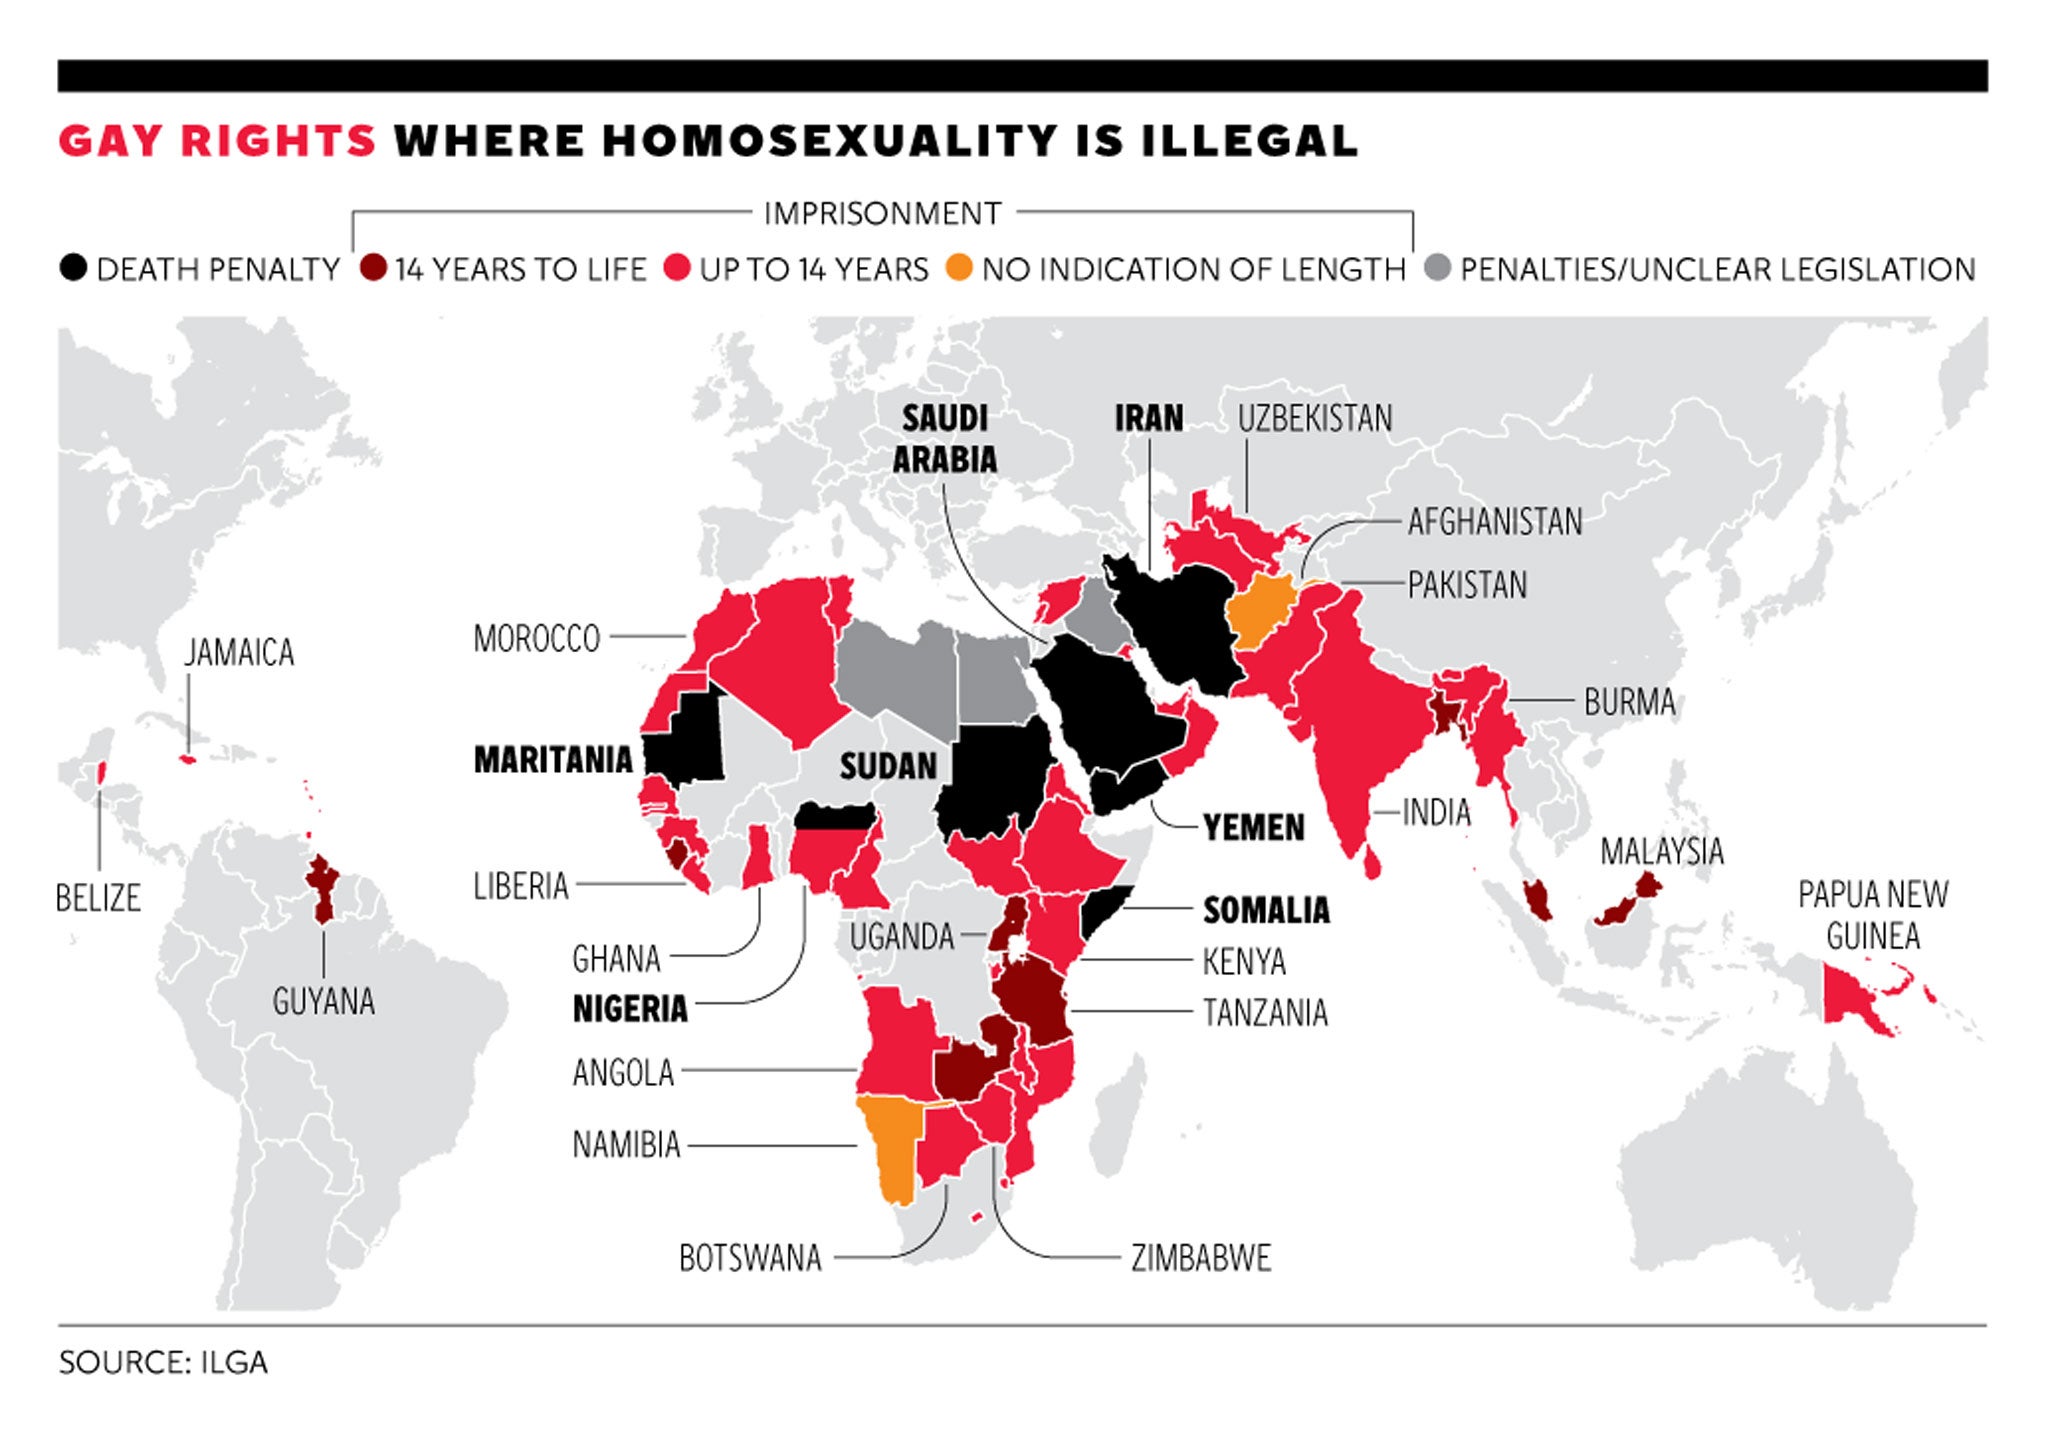 LGBT rights groups have condemned the recent developments in anti-gay laws of Nigeria and Uganda - but also points out that for some countries, the situation is even worse